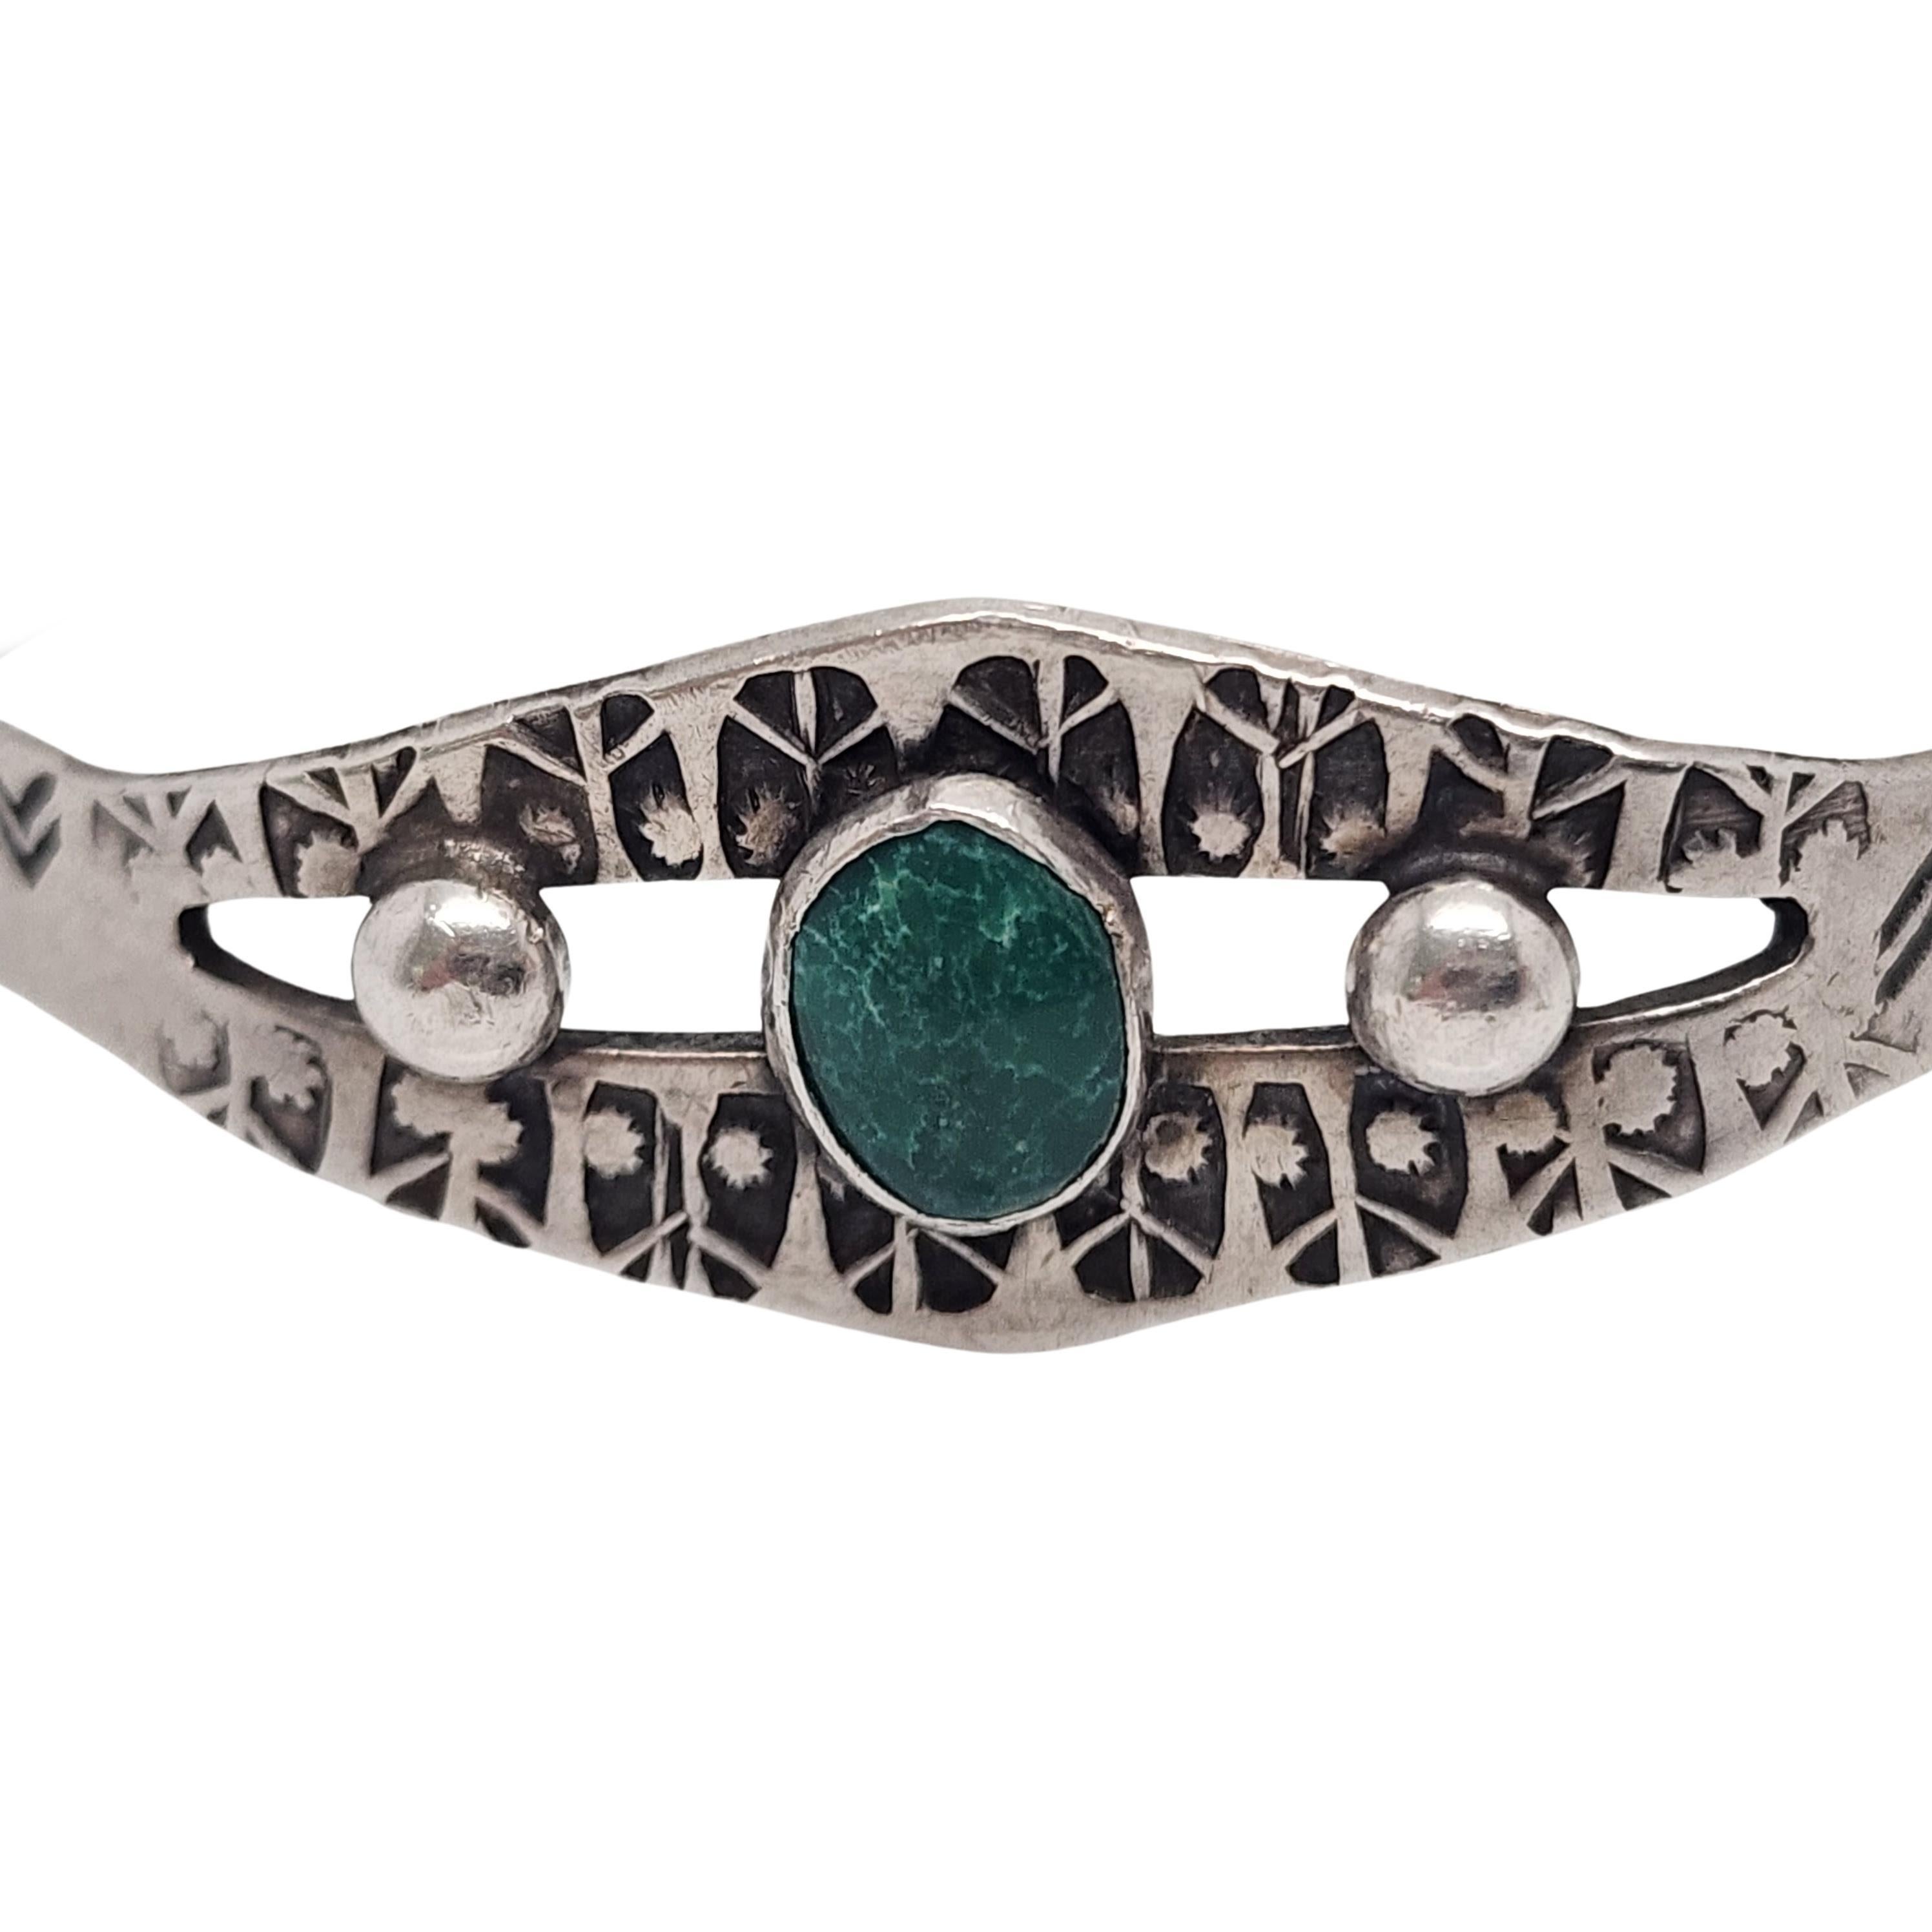 Native American Fred Harvey Era Sterling Silver Green Turquoise Cuff Bracelet #15359 For Sale